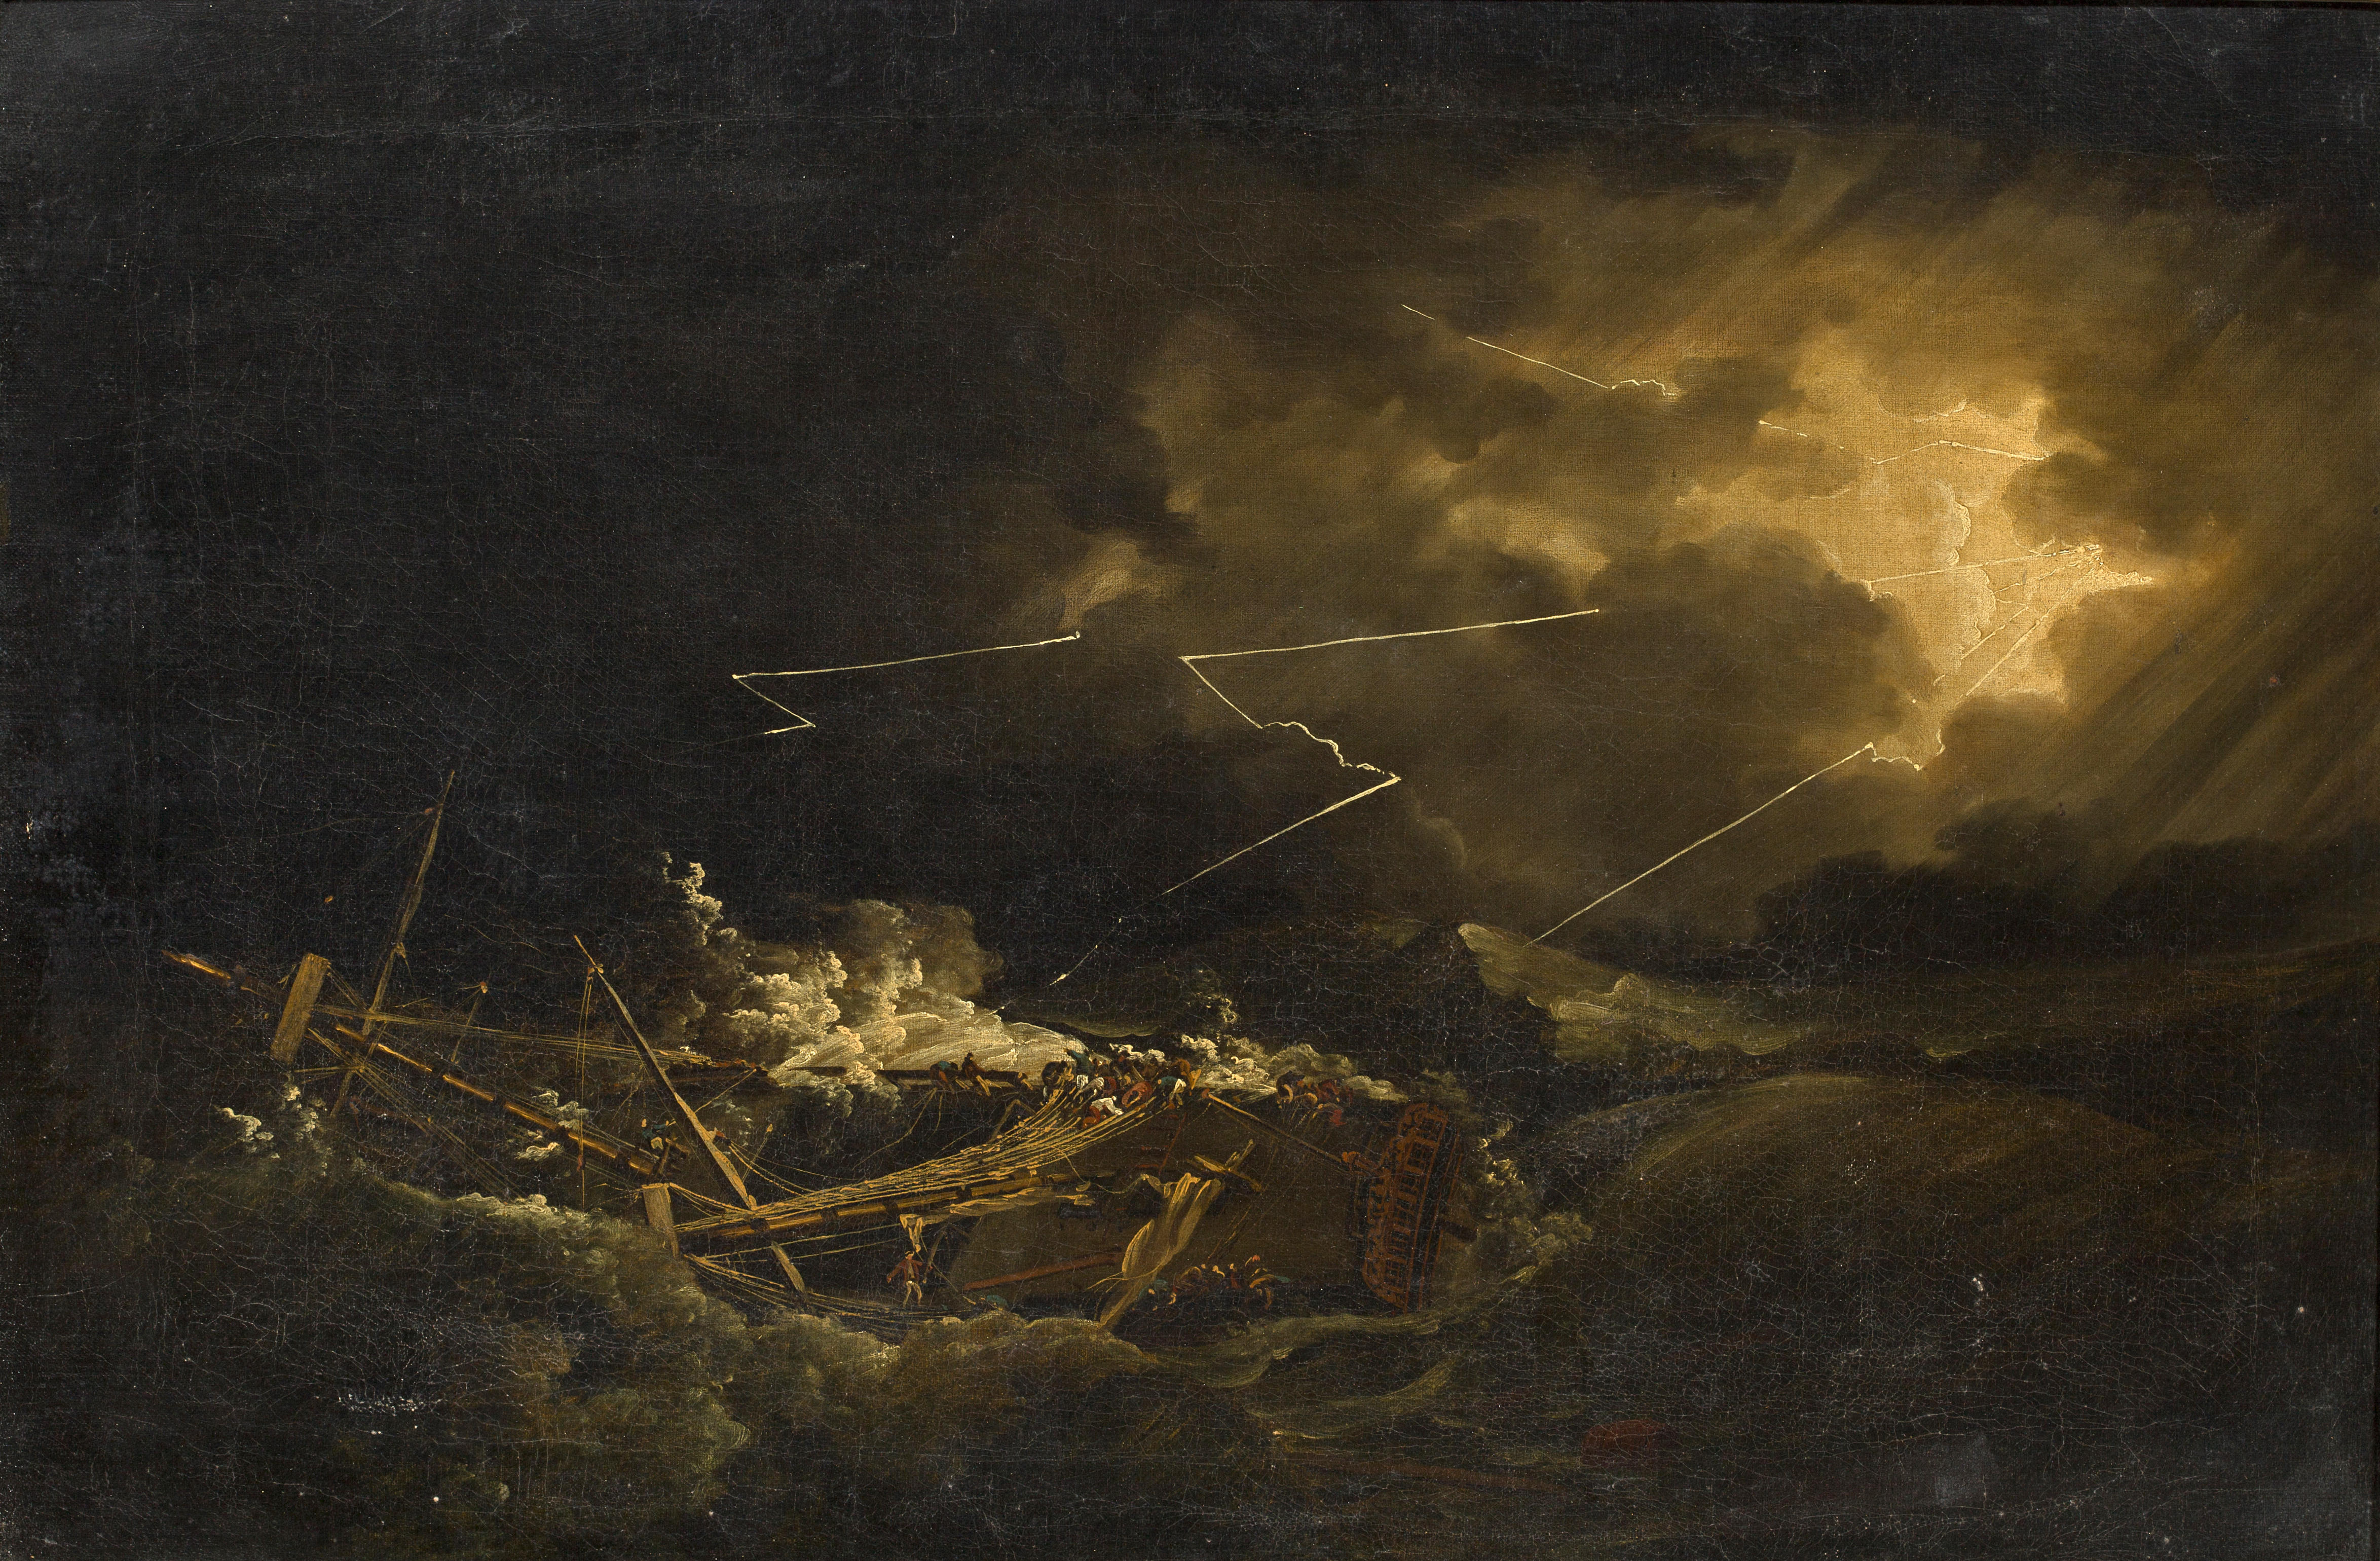 John Thomas Serres - The wreck of the H.M.S. Deal Castle